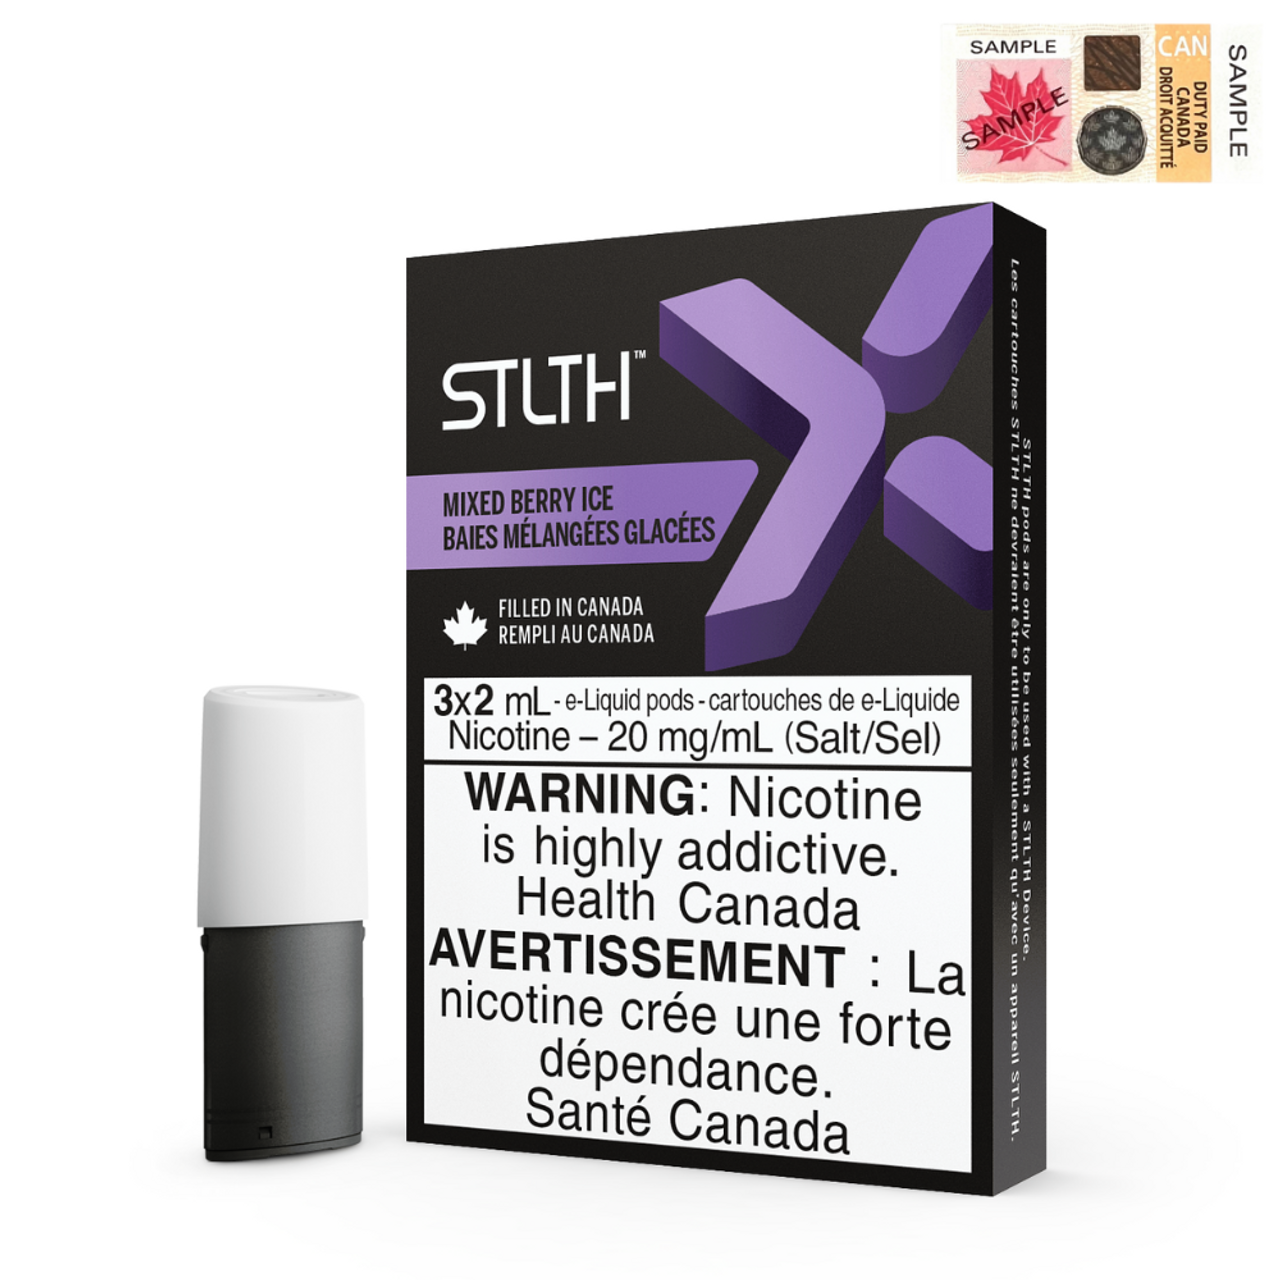 Mixed Berry Ice (Stamped) STLTH X Pods Pack of 3 - B.C. Compliance